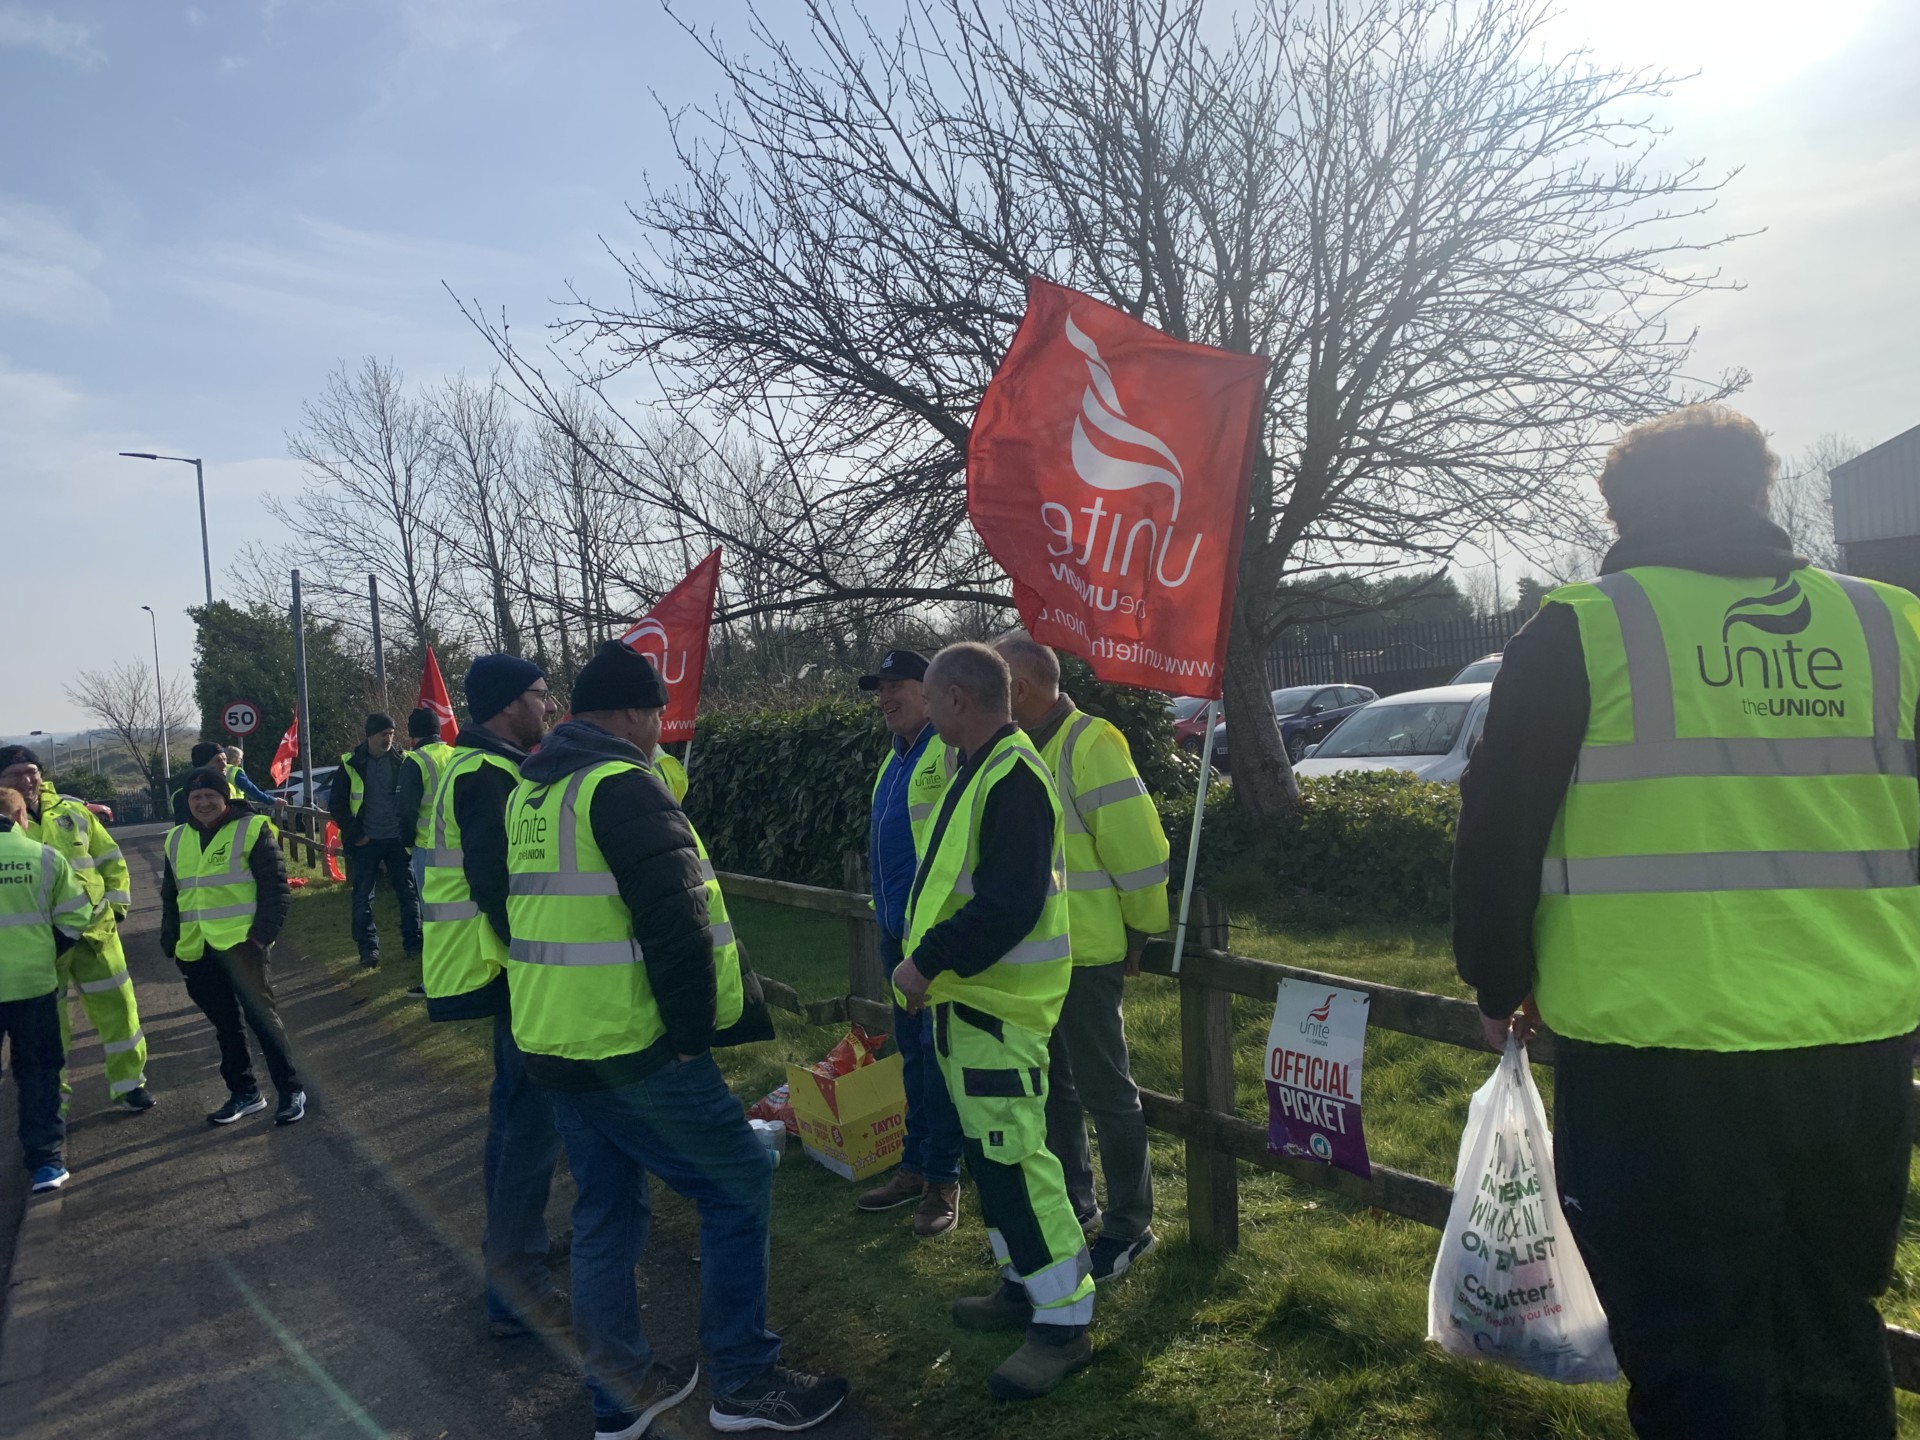 Striking for a fair day’s pay